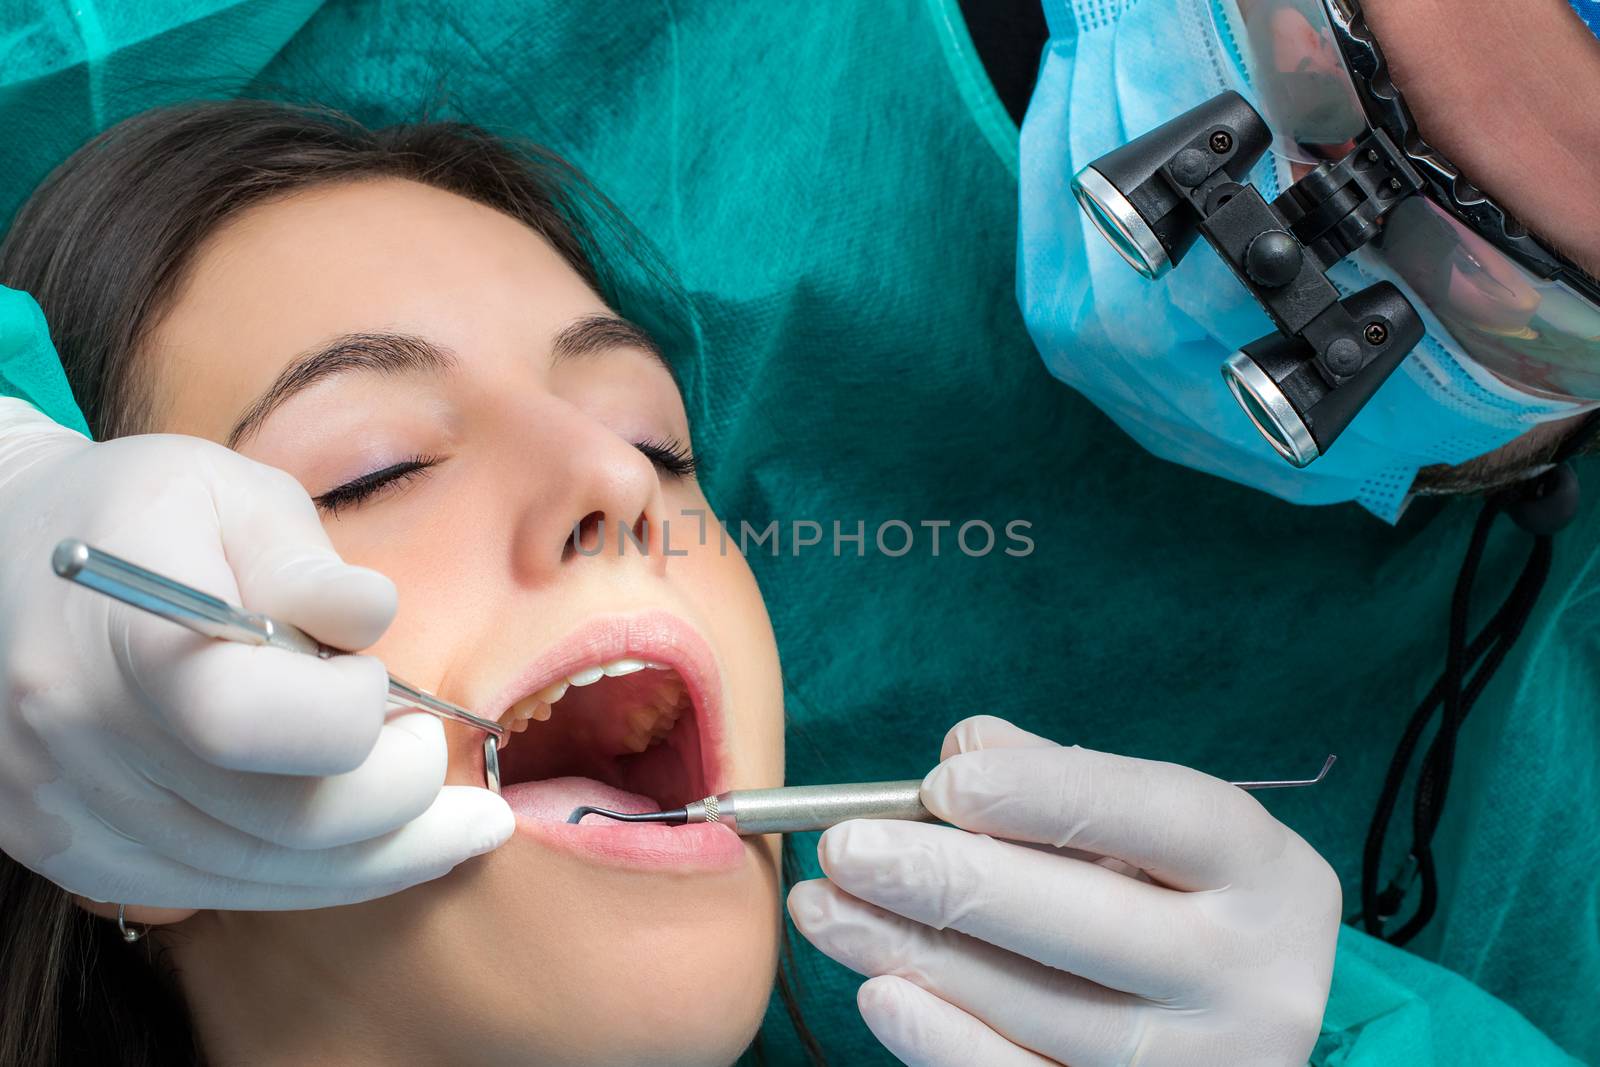 Close up of dentist wearing medical magnifying glasses working on female patient.Surgeon in green gown with mouth mirror and scaler. 